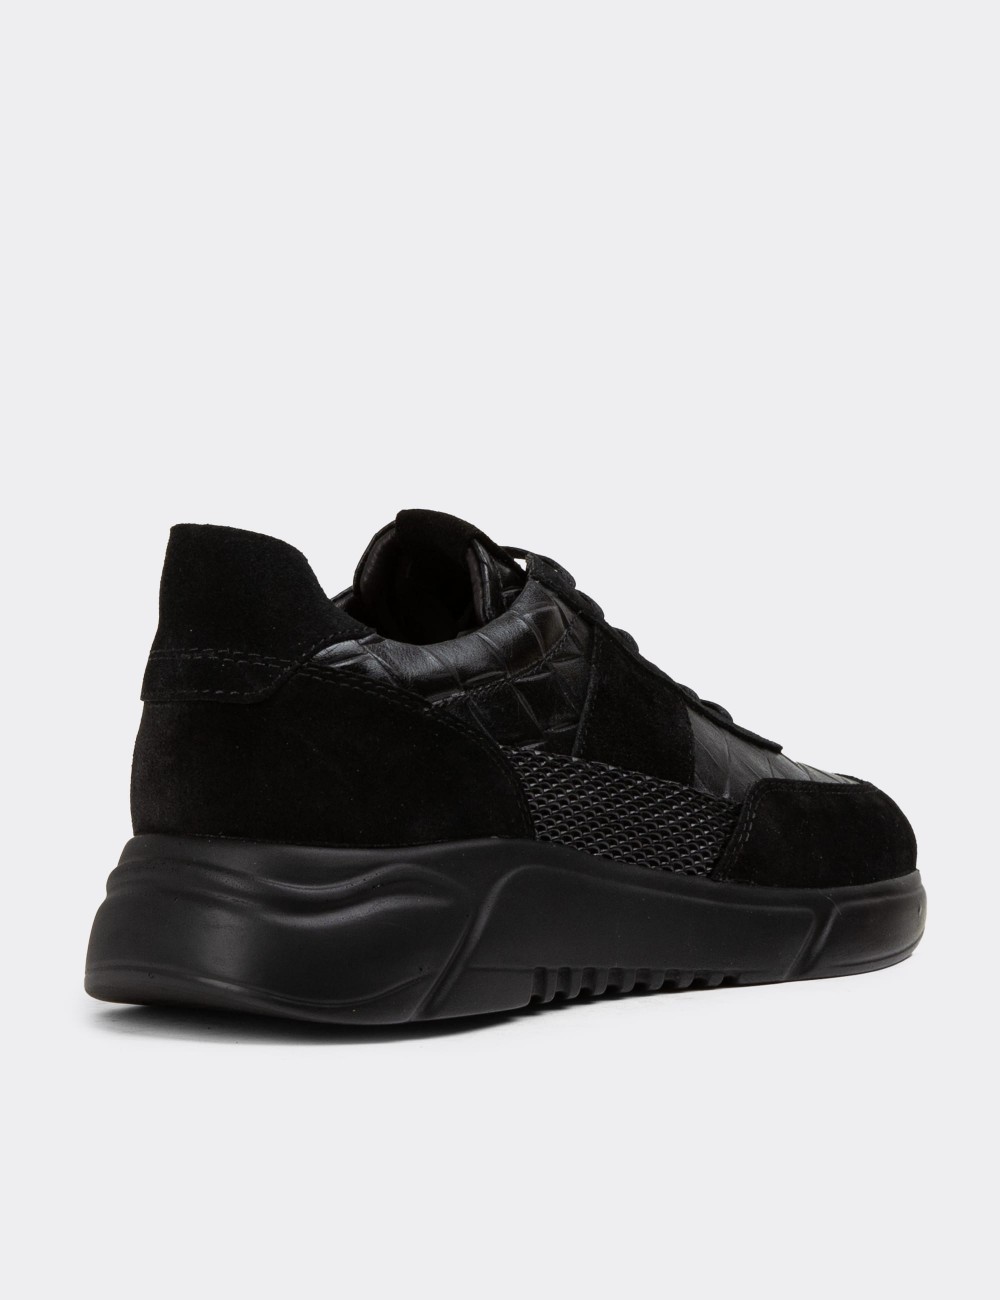 Black Suede Leather Sneakers - 01963MSYHE08